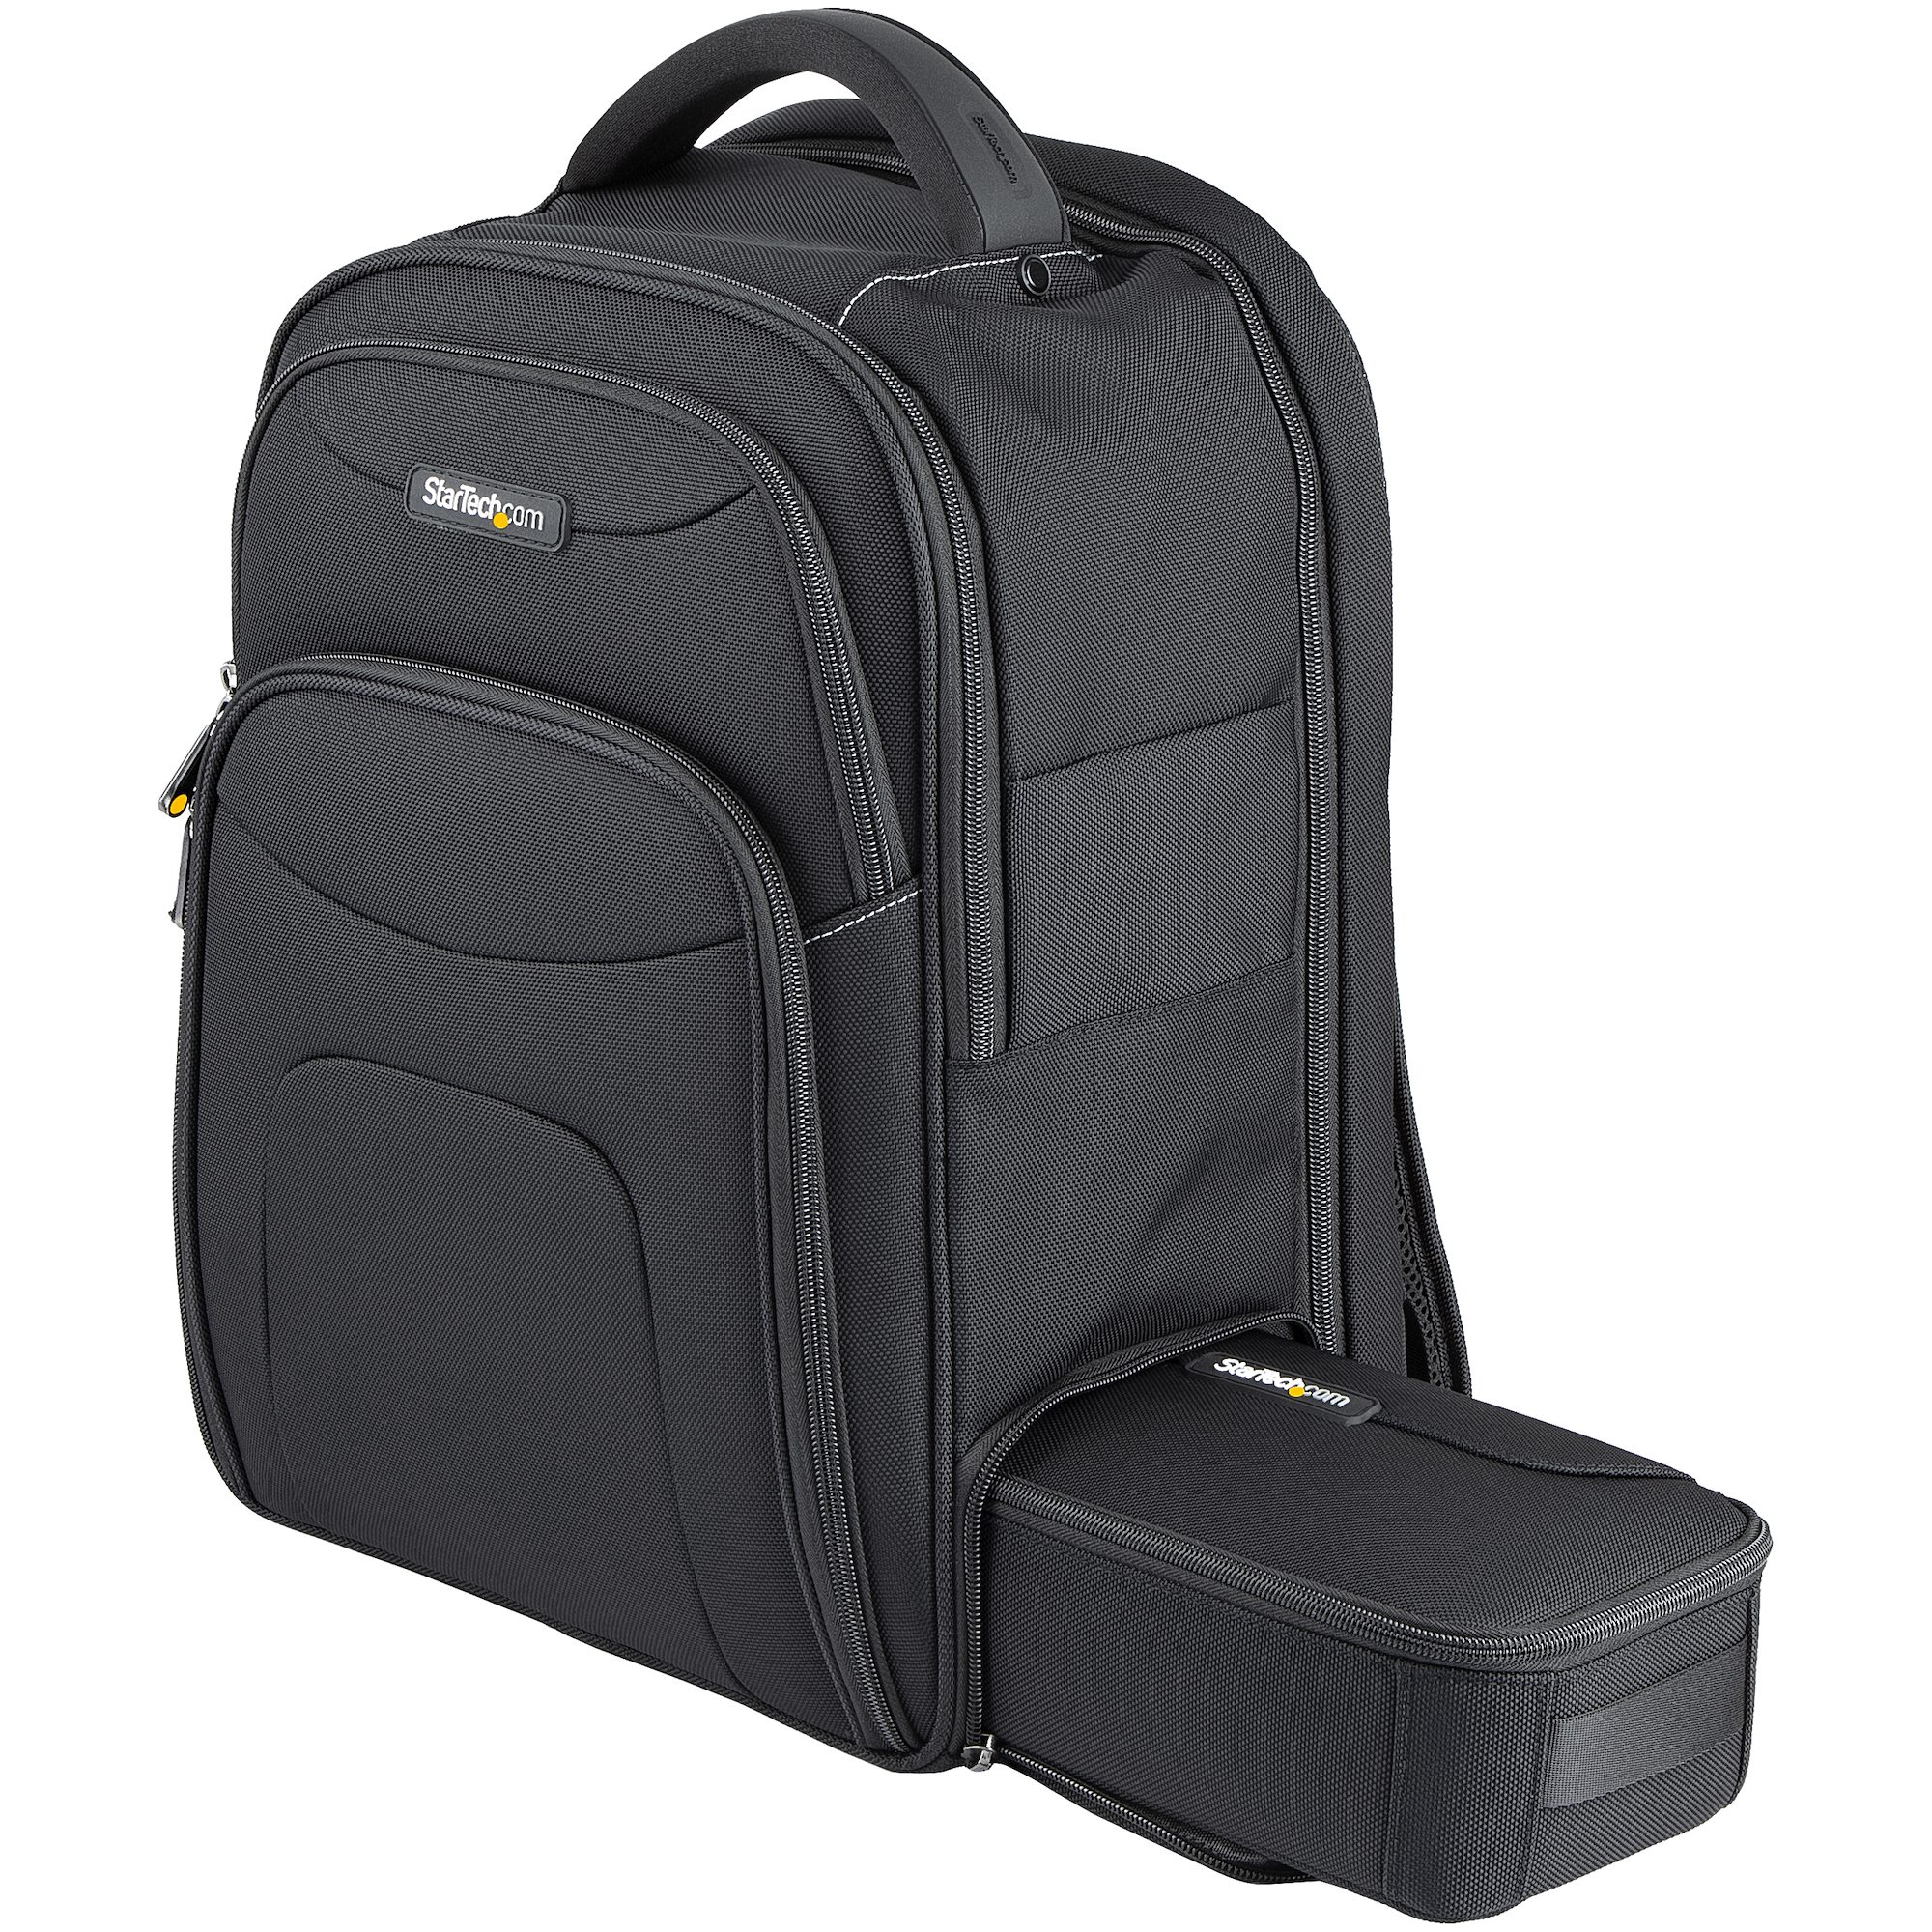 remark academic lecture 15.6in Laptop Backpack w/ Accessory Case - Laptop Backpacks | StarTech.com